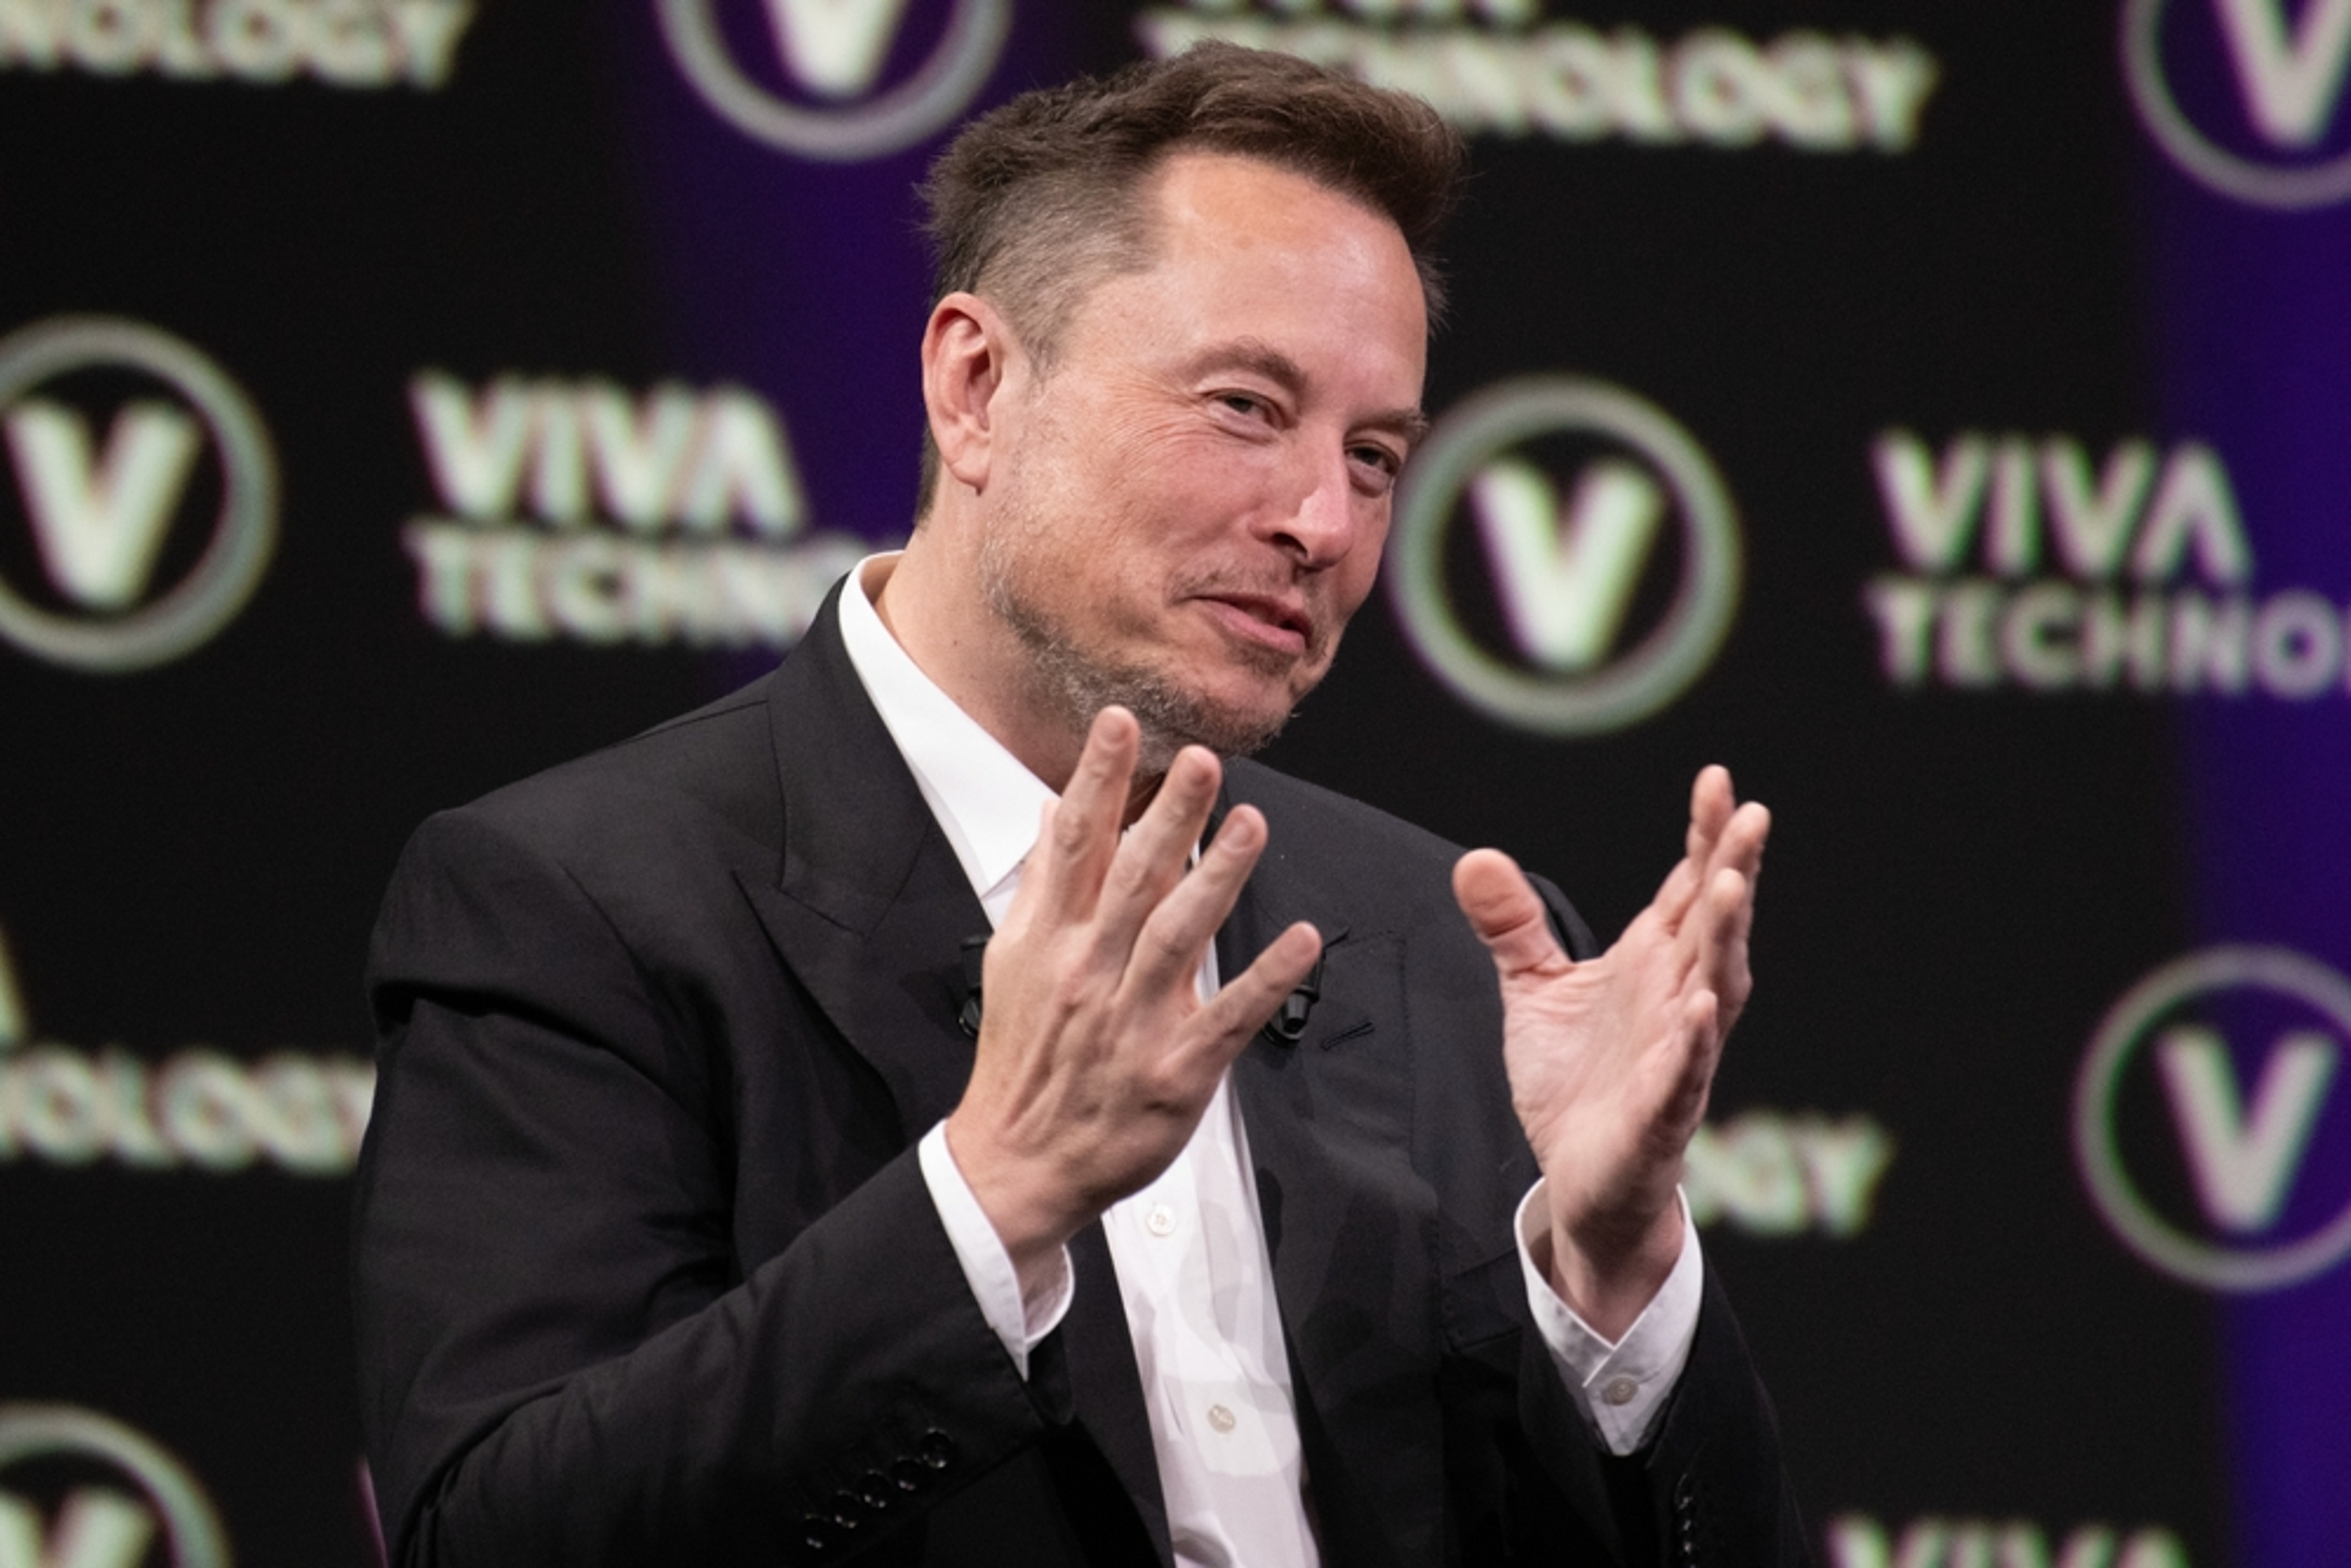 Henry Ford And Elon Musk Changed How Companies Buy Cars, This Company Is Doing The Same For Housing